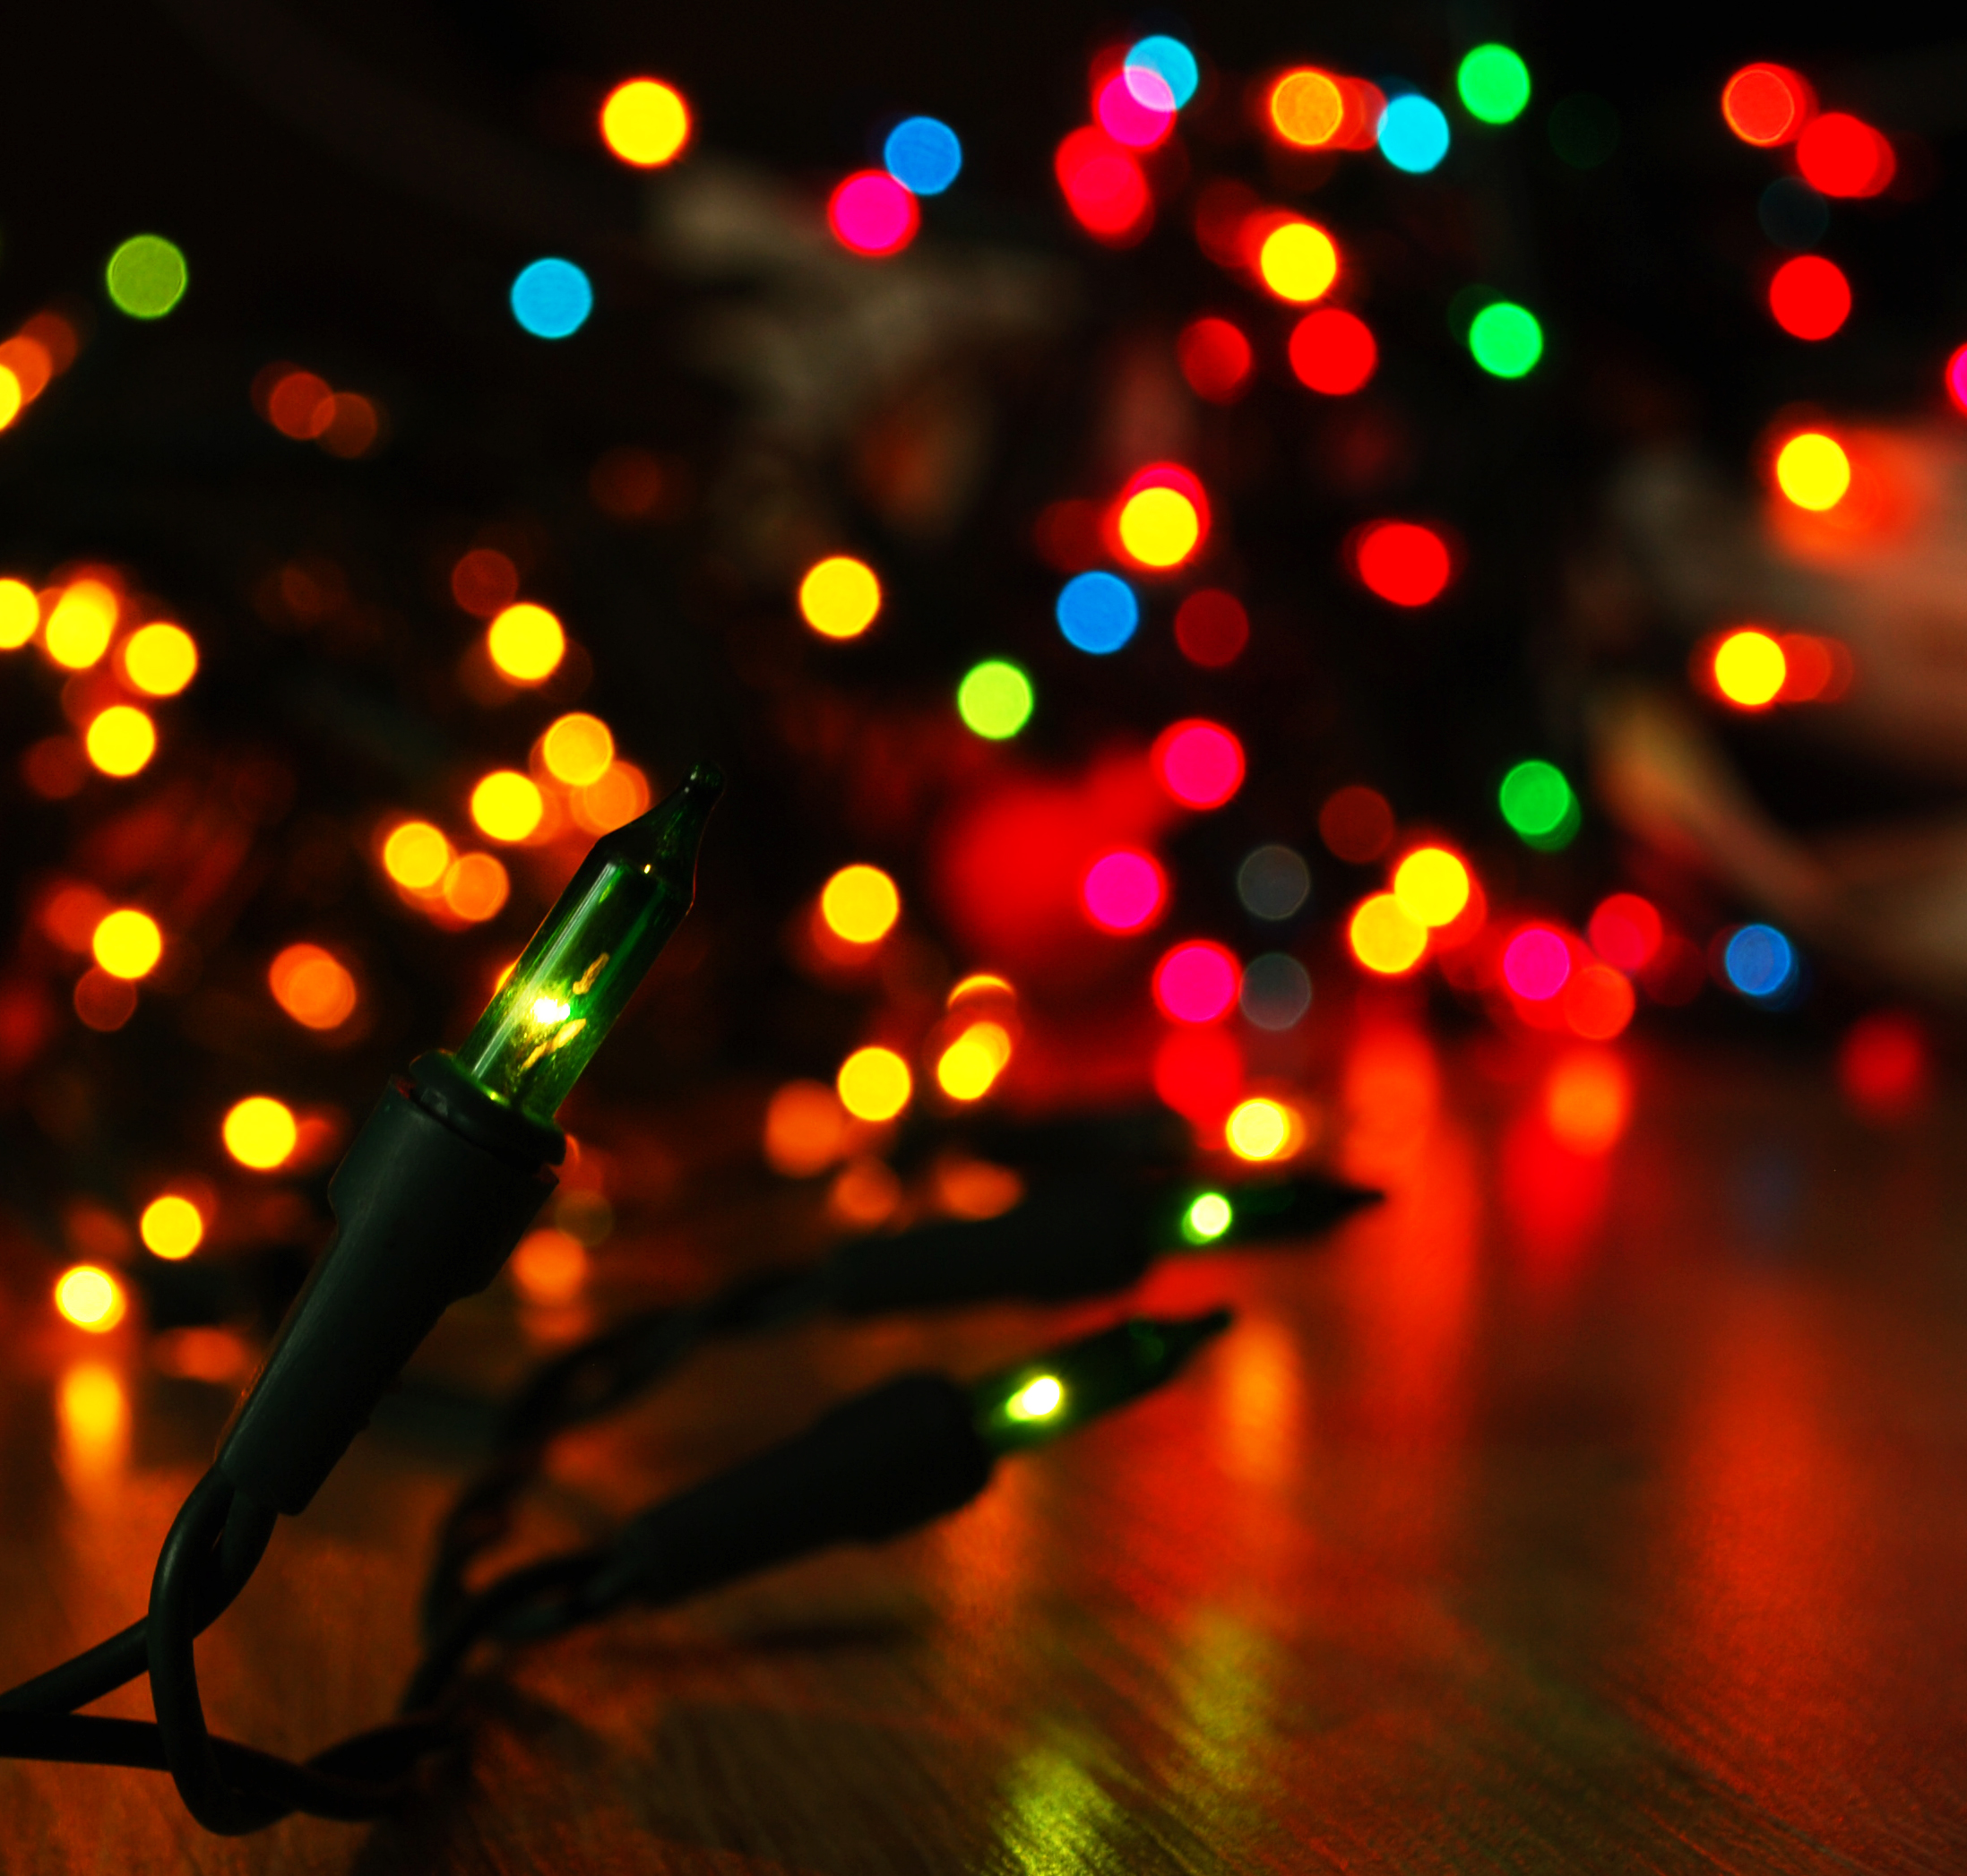 Colorful Christmas Lights Background Image Amp Pictures Becuo